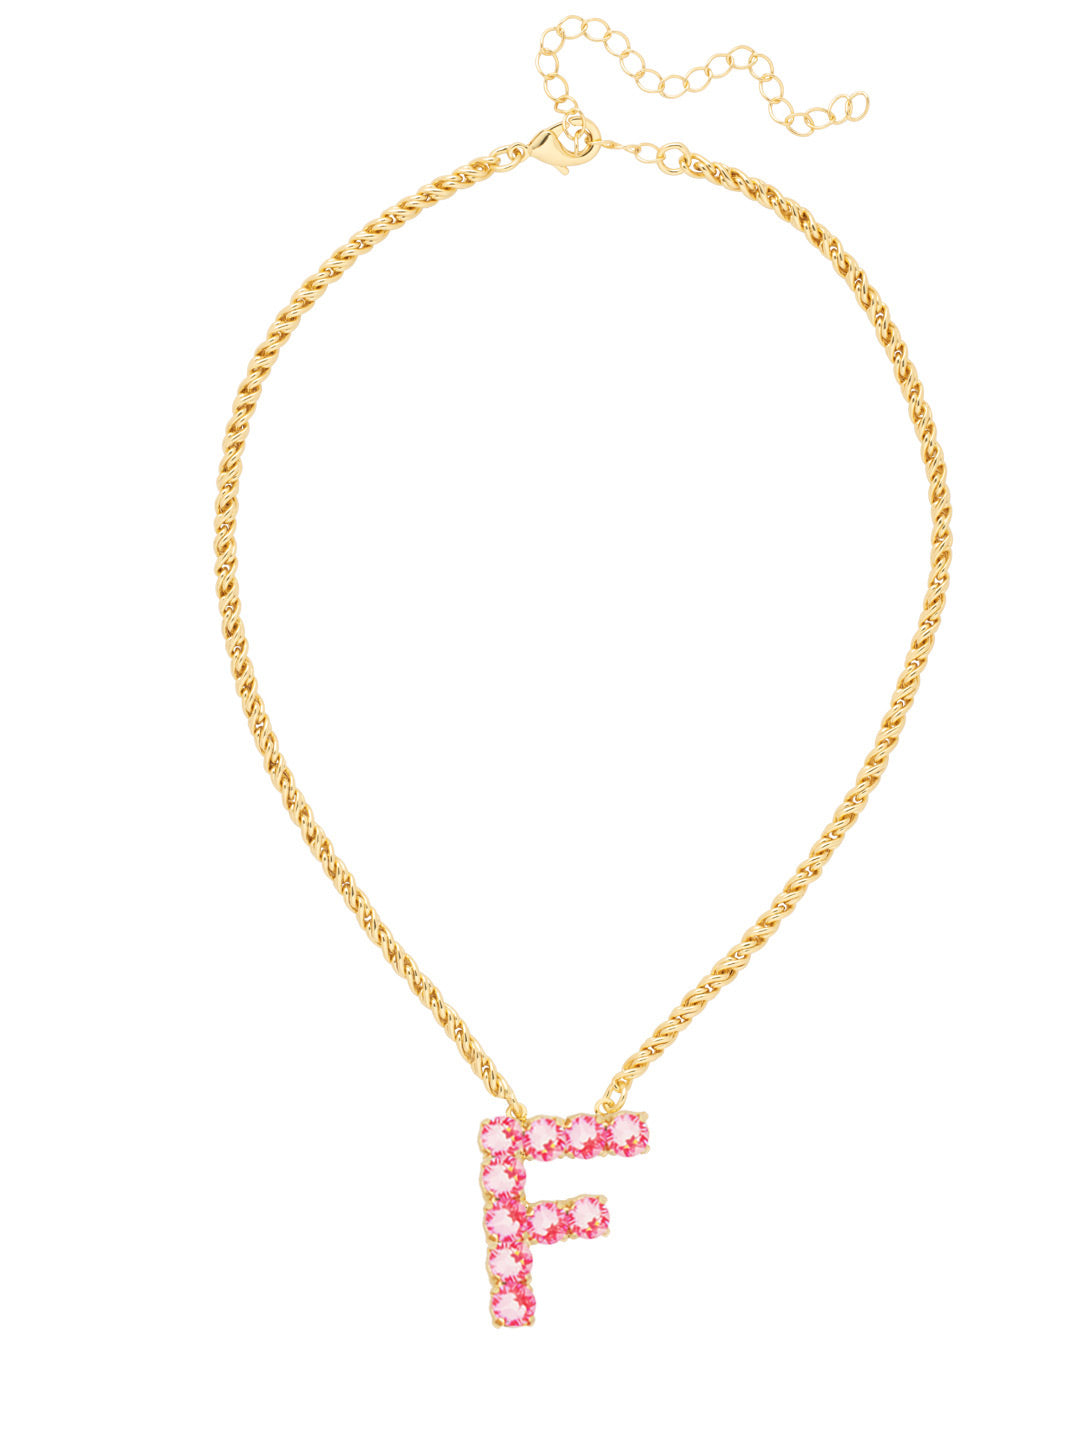 F Initial Rope Pendant Necklace - NFK25BGETP